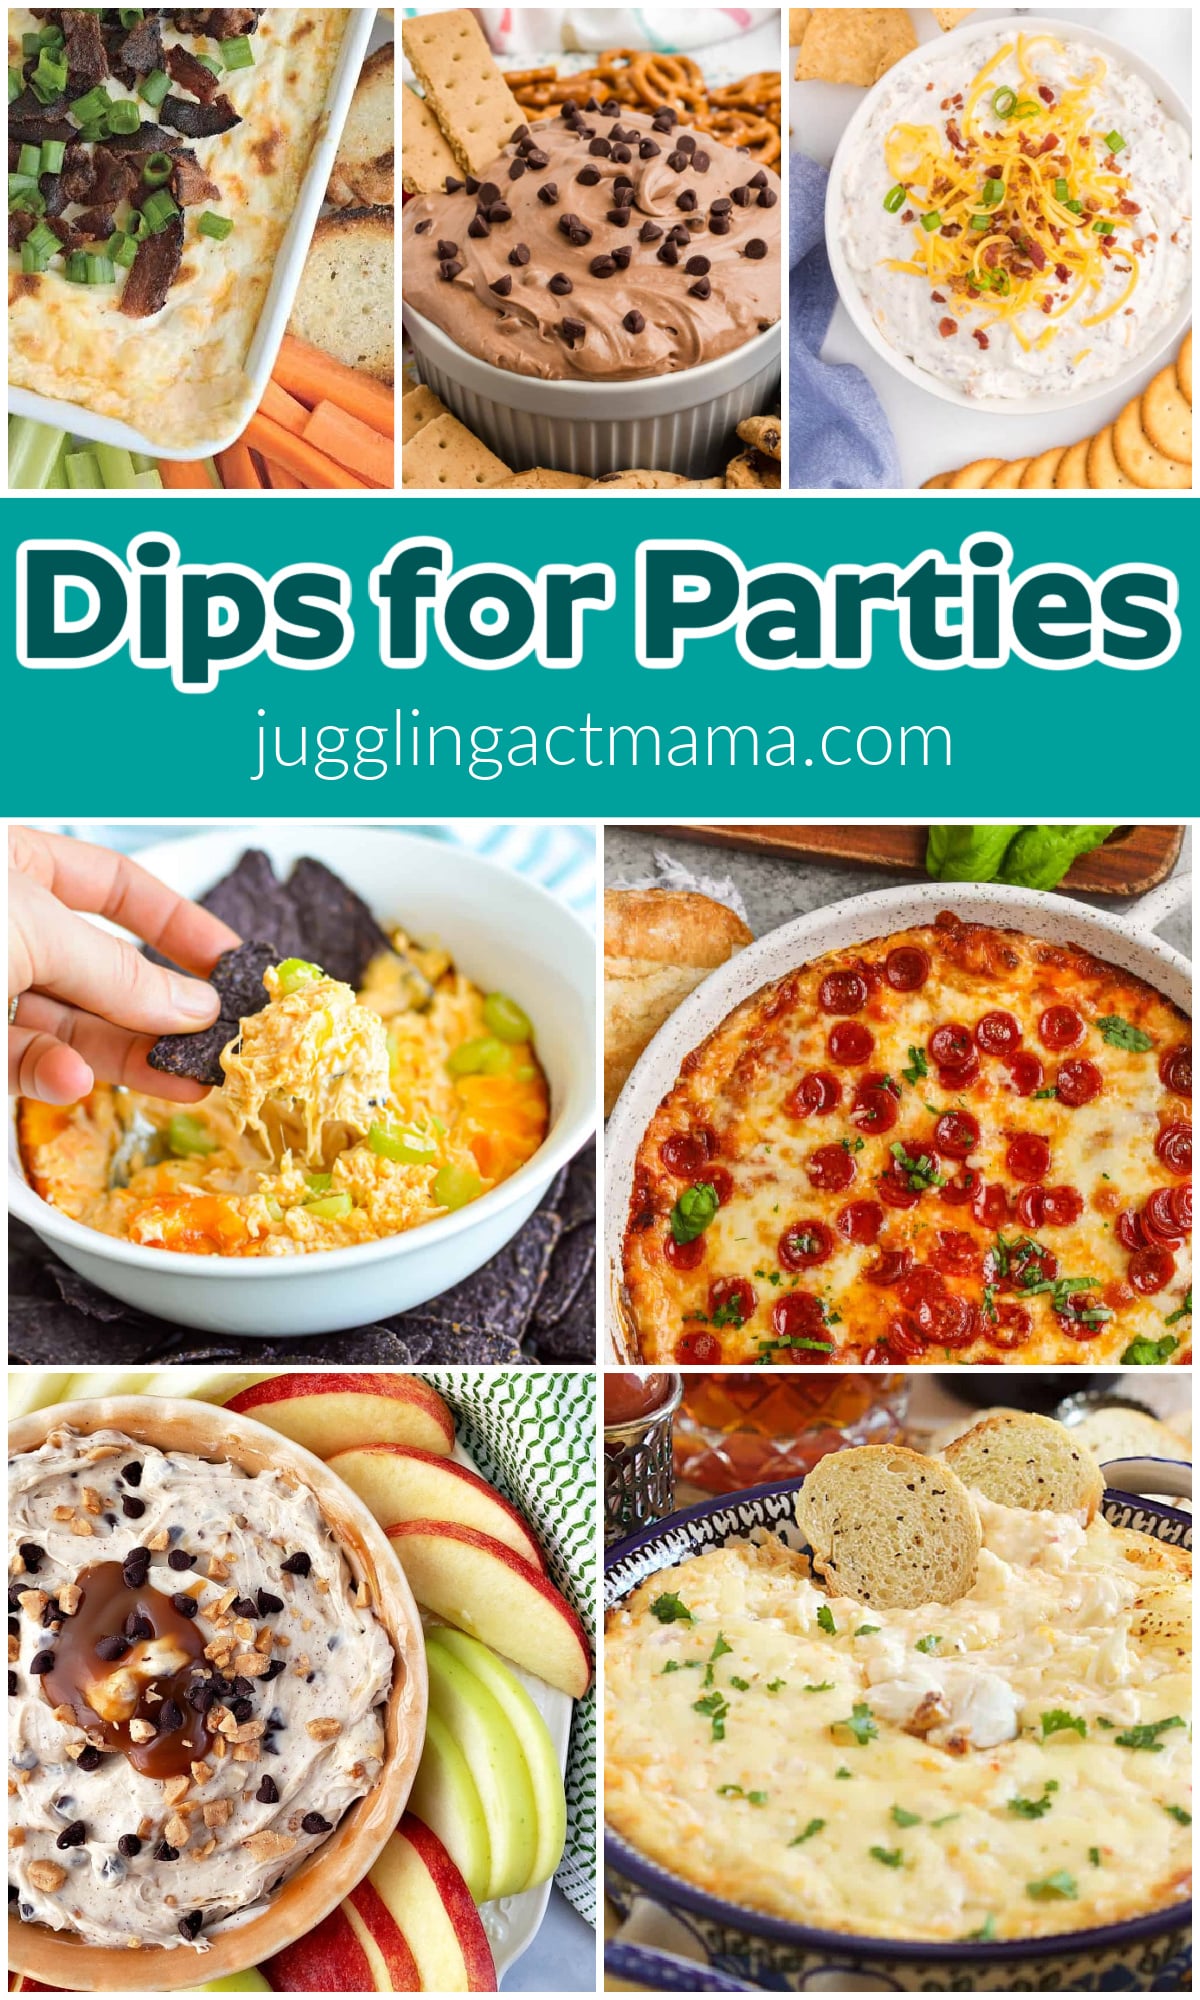 Best Dips for a Party - both hot and cold easy dip recipes for potlucks. parties and the best dips for game day - plus sweet and savory dips. via @jugglingactmama